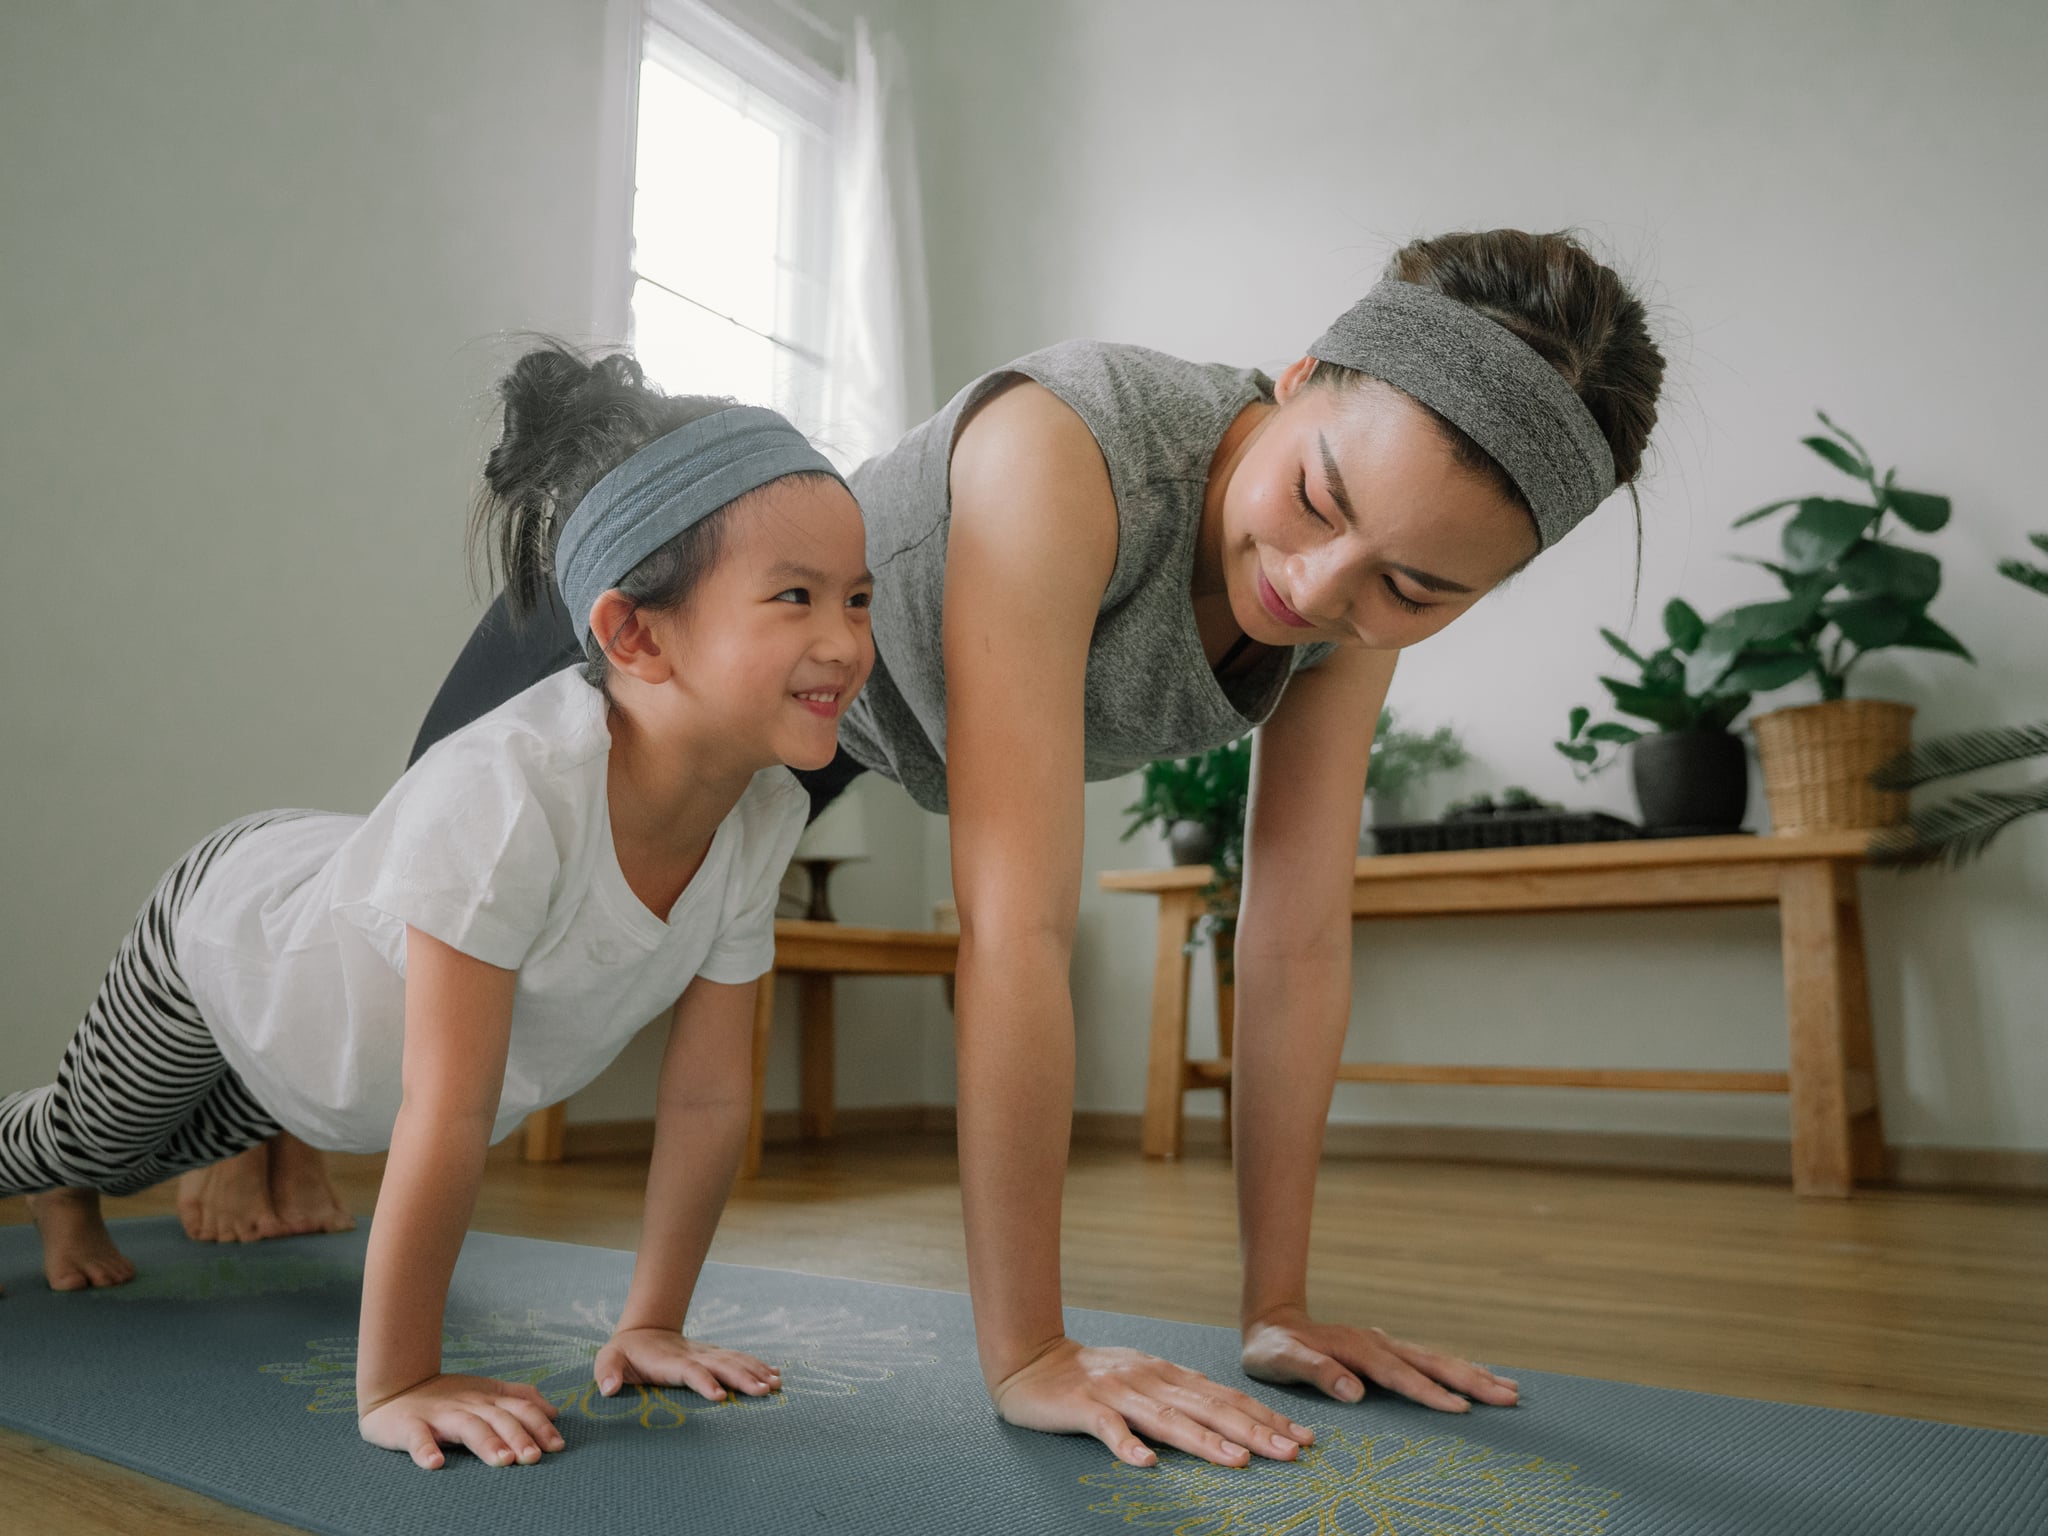 <p>Gentle movement can be relaxing and engaging but not tiring. Stretch limbs by doing yoga together. Apps like Peloton and even YouTube have practices geared toward children and families.</p>